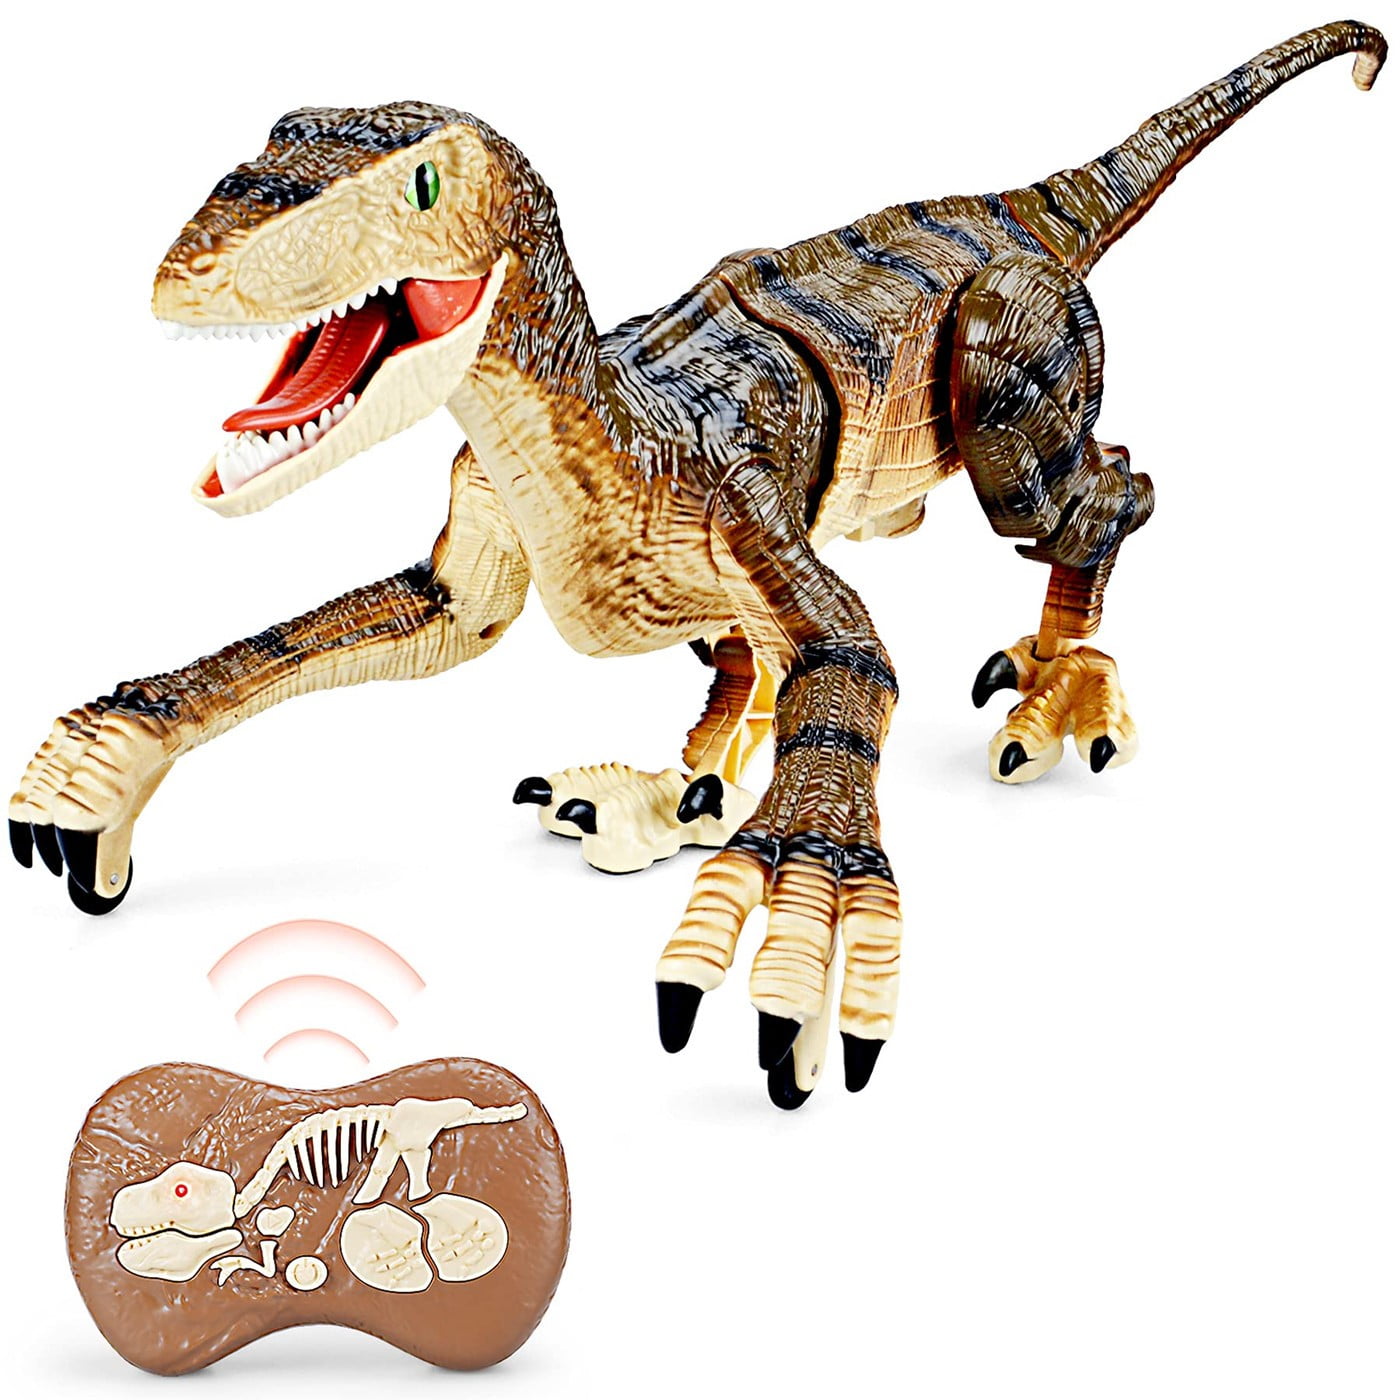 Roaring Sounds,LED Lights,2.4Ghz,RC Electronic Dinosaur Velociraptor Toys for Kids 3 4 5 6 7 8 9 10 Brown Remote Control Dinosaur Toys,Simulation Robotic Dinosaurs,with USB Charge Years Old Gifts 